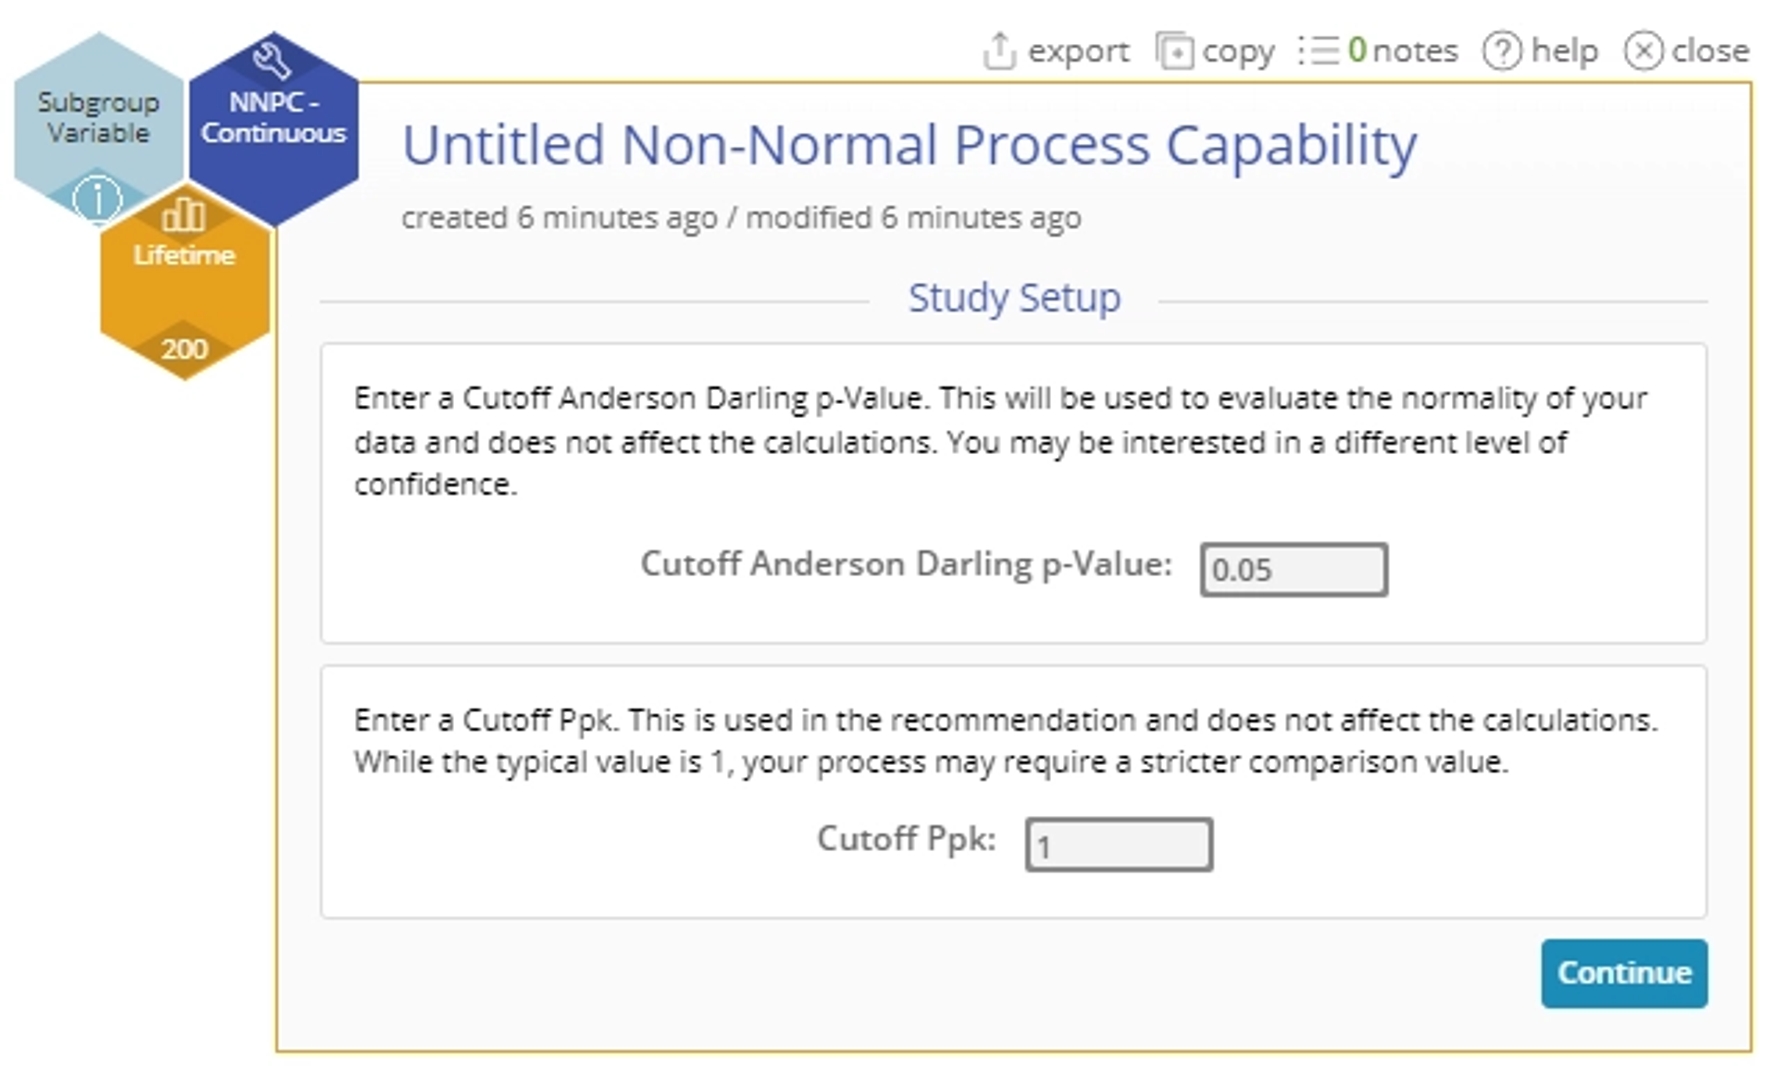 Non-normal process capabilities with cutoff values set.